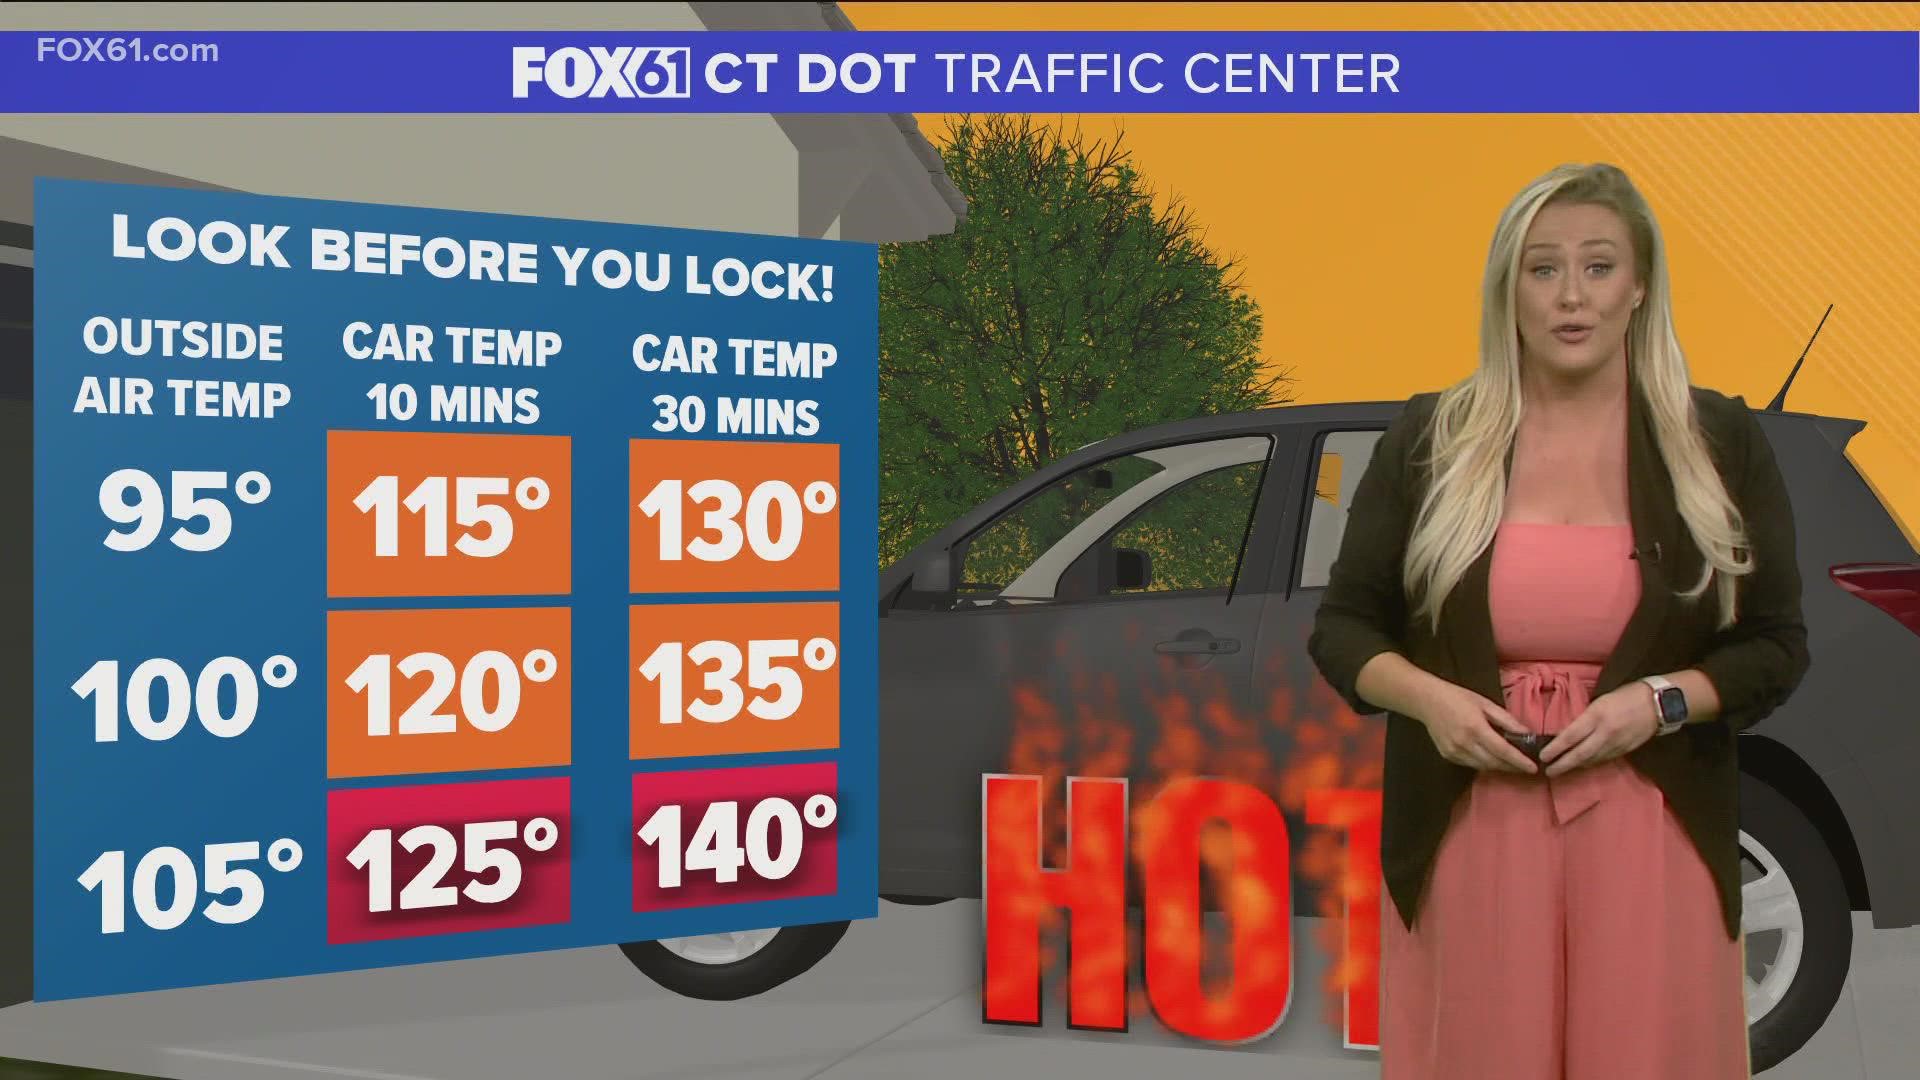 AAA has statistics on hot car deaths and advice on avoiding a tragedy. FOX61's Lauren Zenzie has the details.